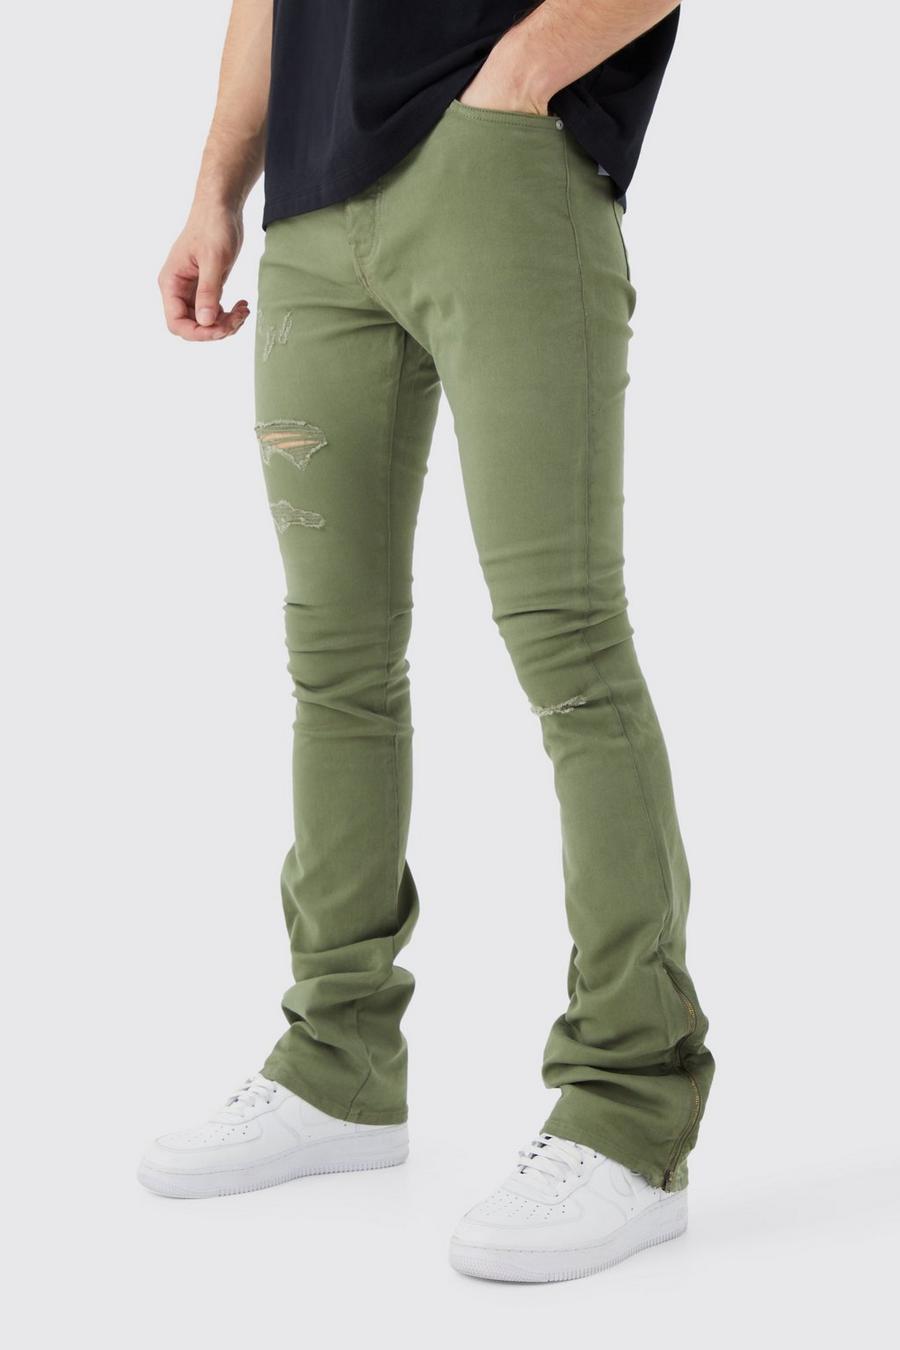 Olive Tall Fixed Waist Rip And Repair Zip Gusset Trouser